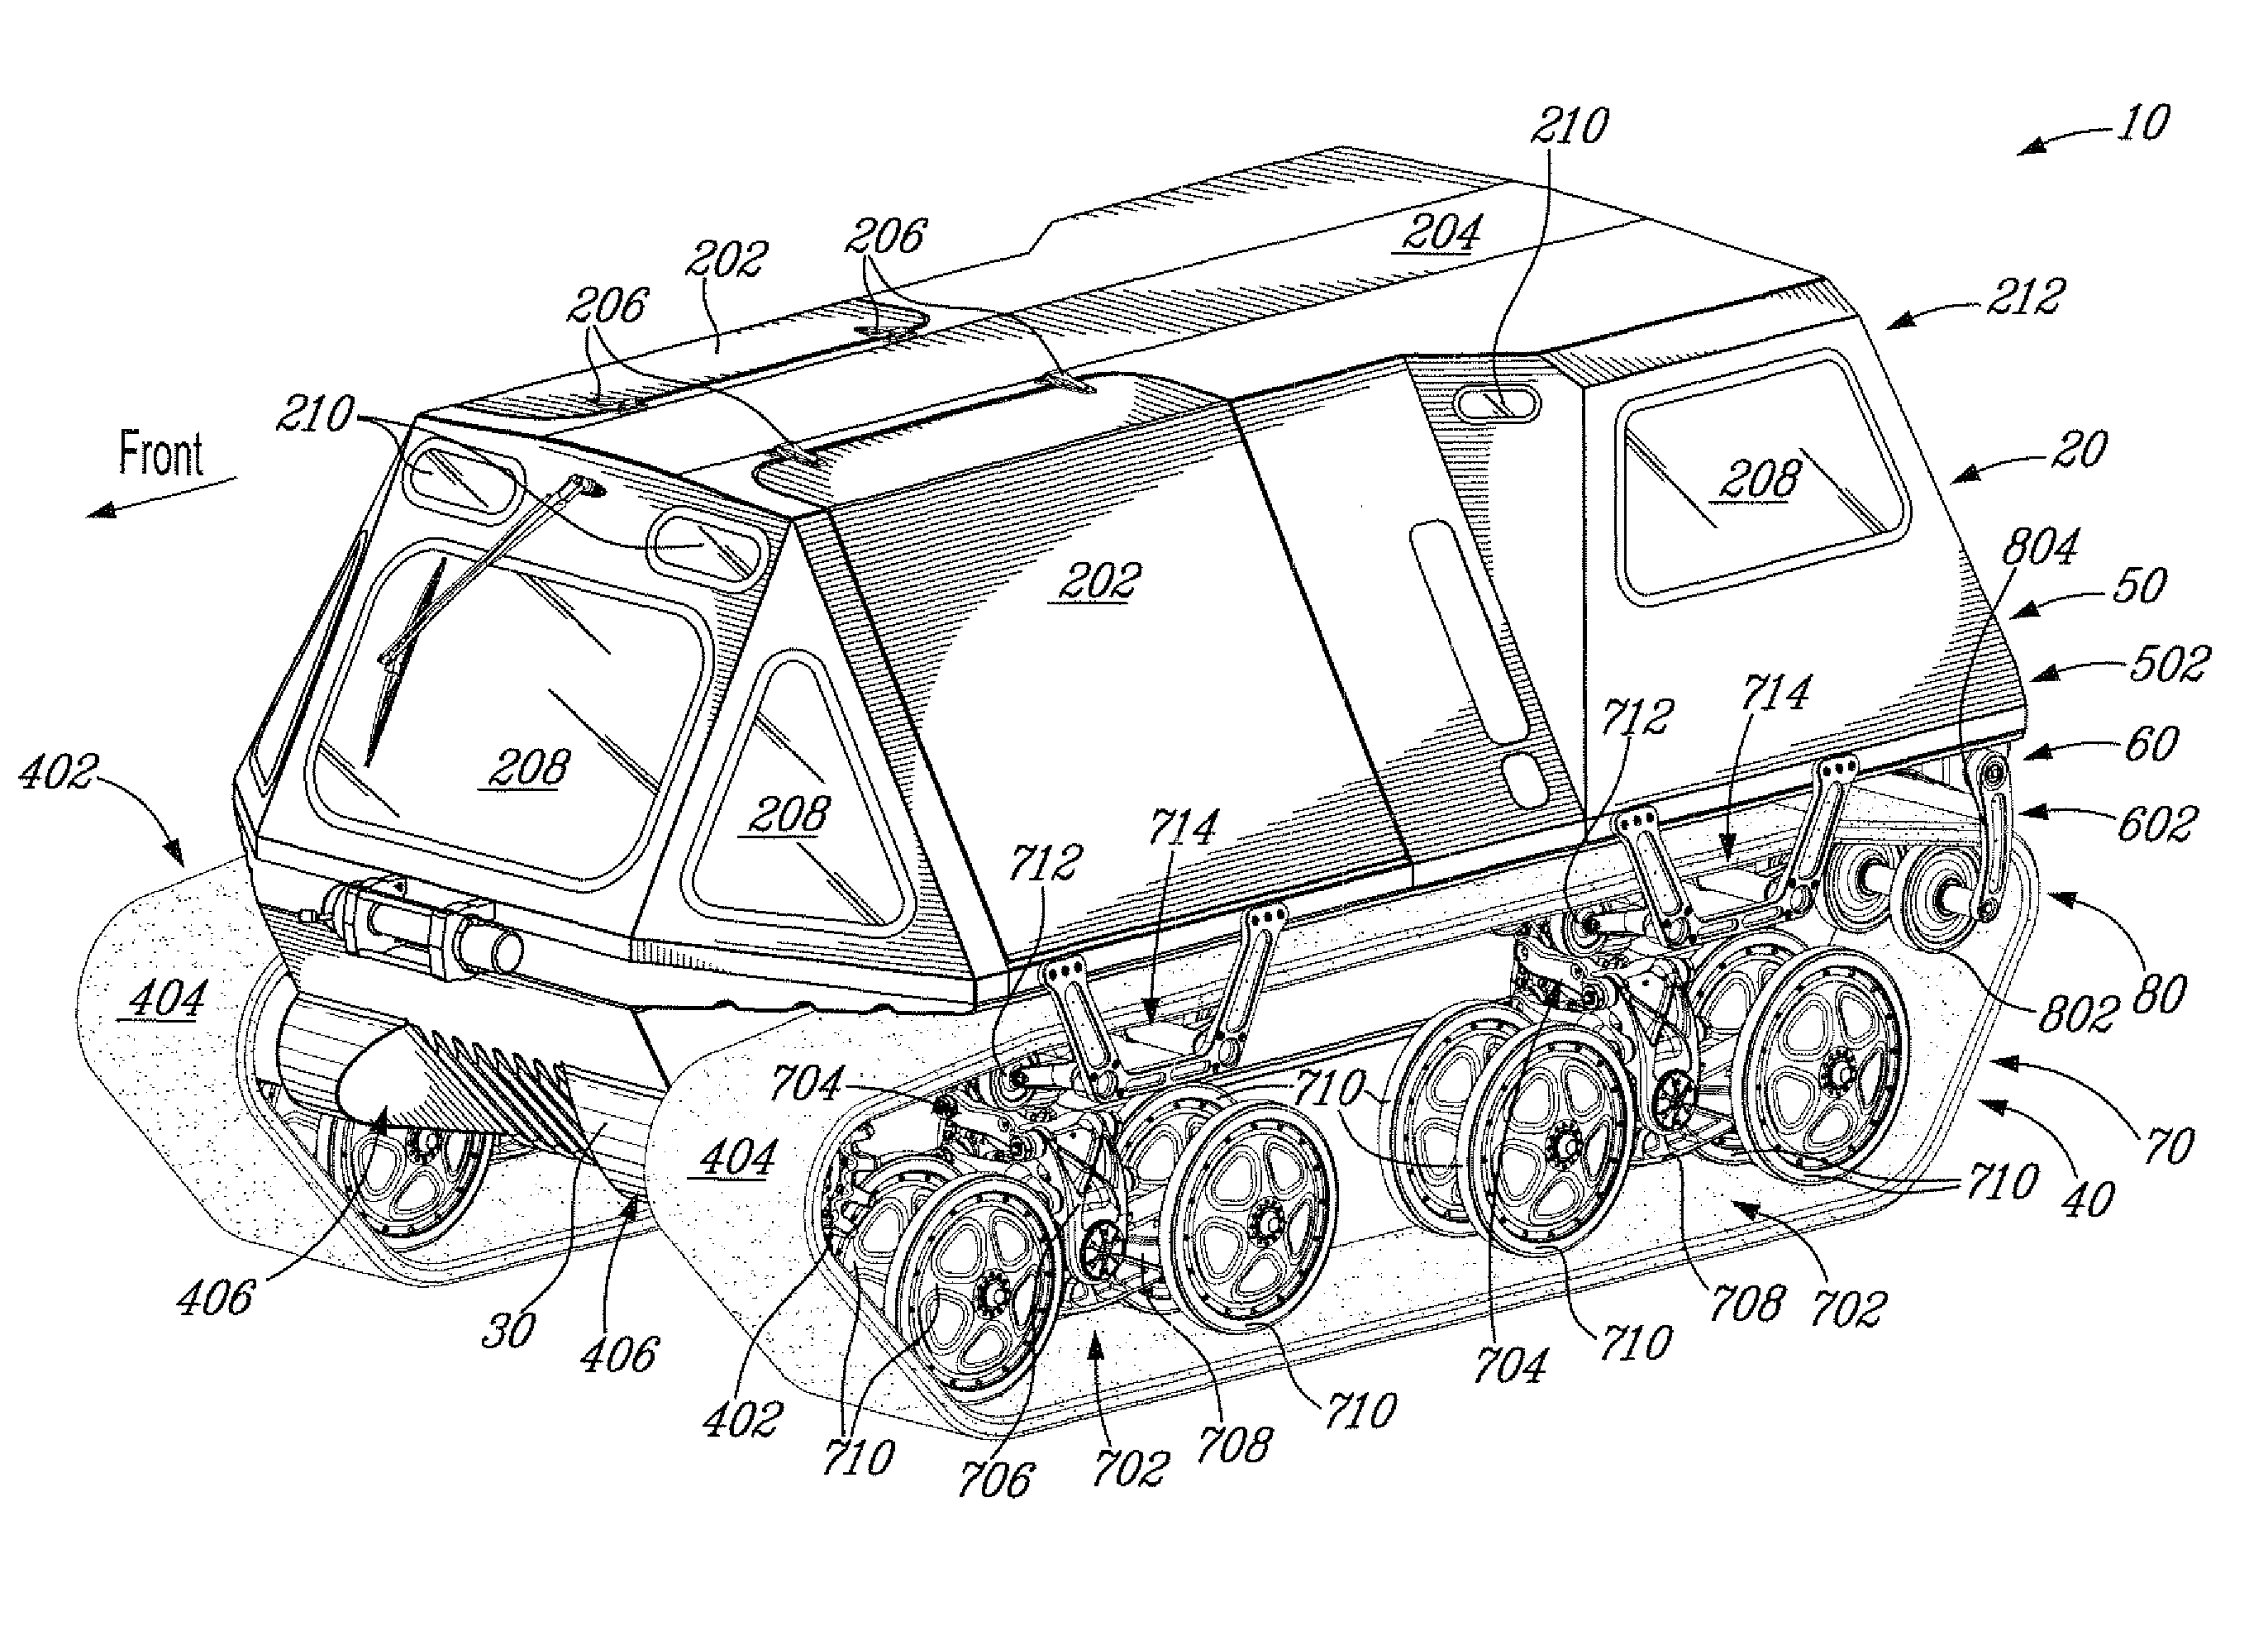 Endless belt tensioner system and method of use thereof